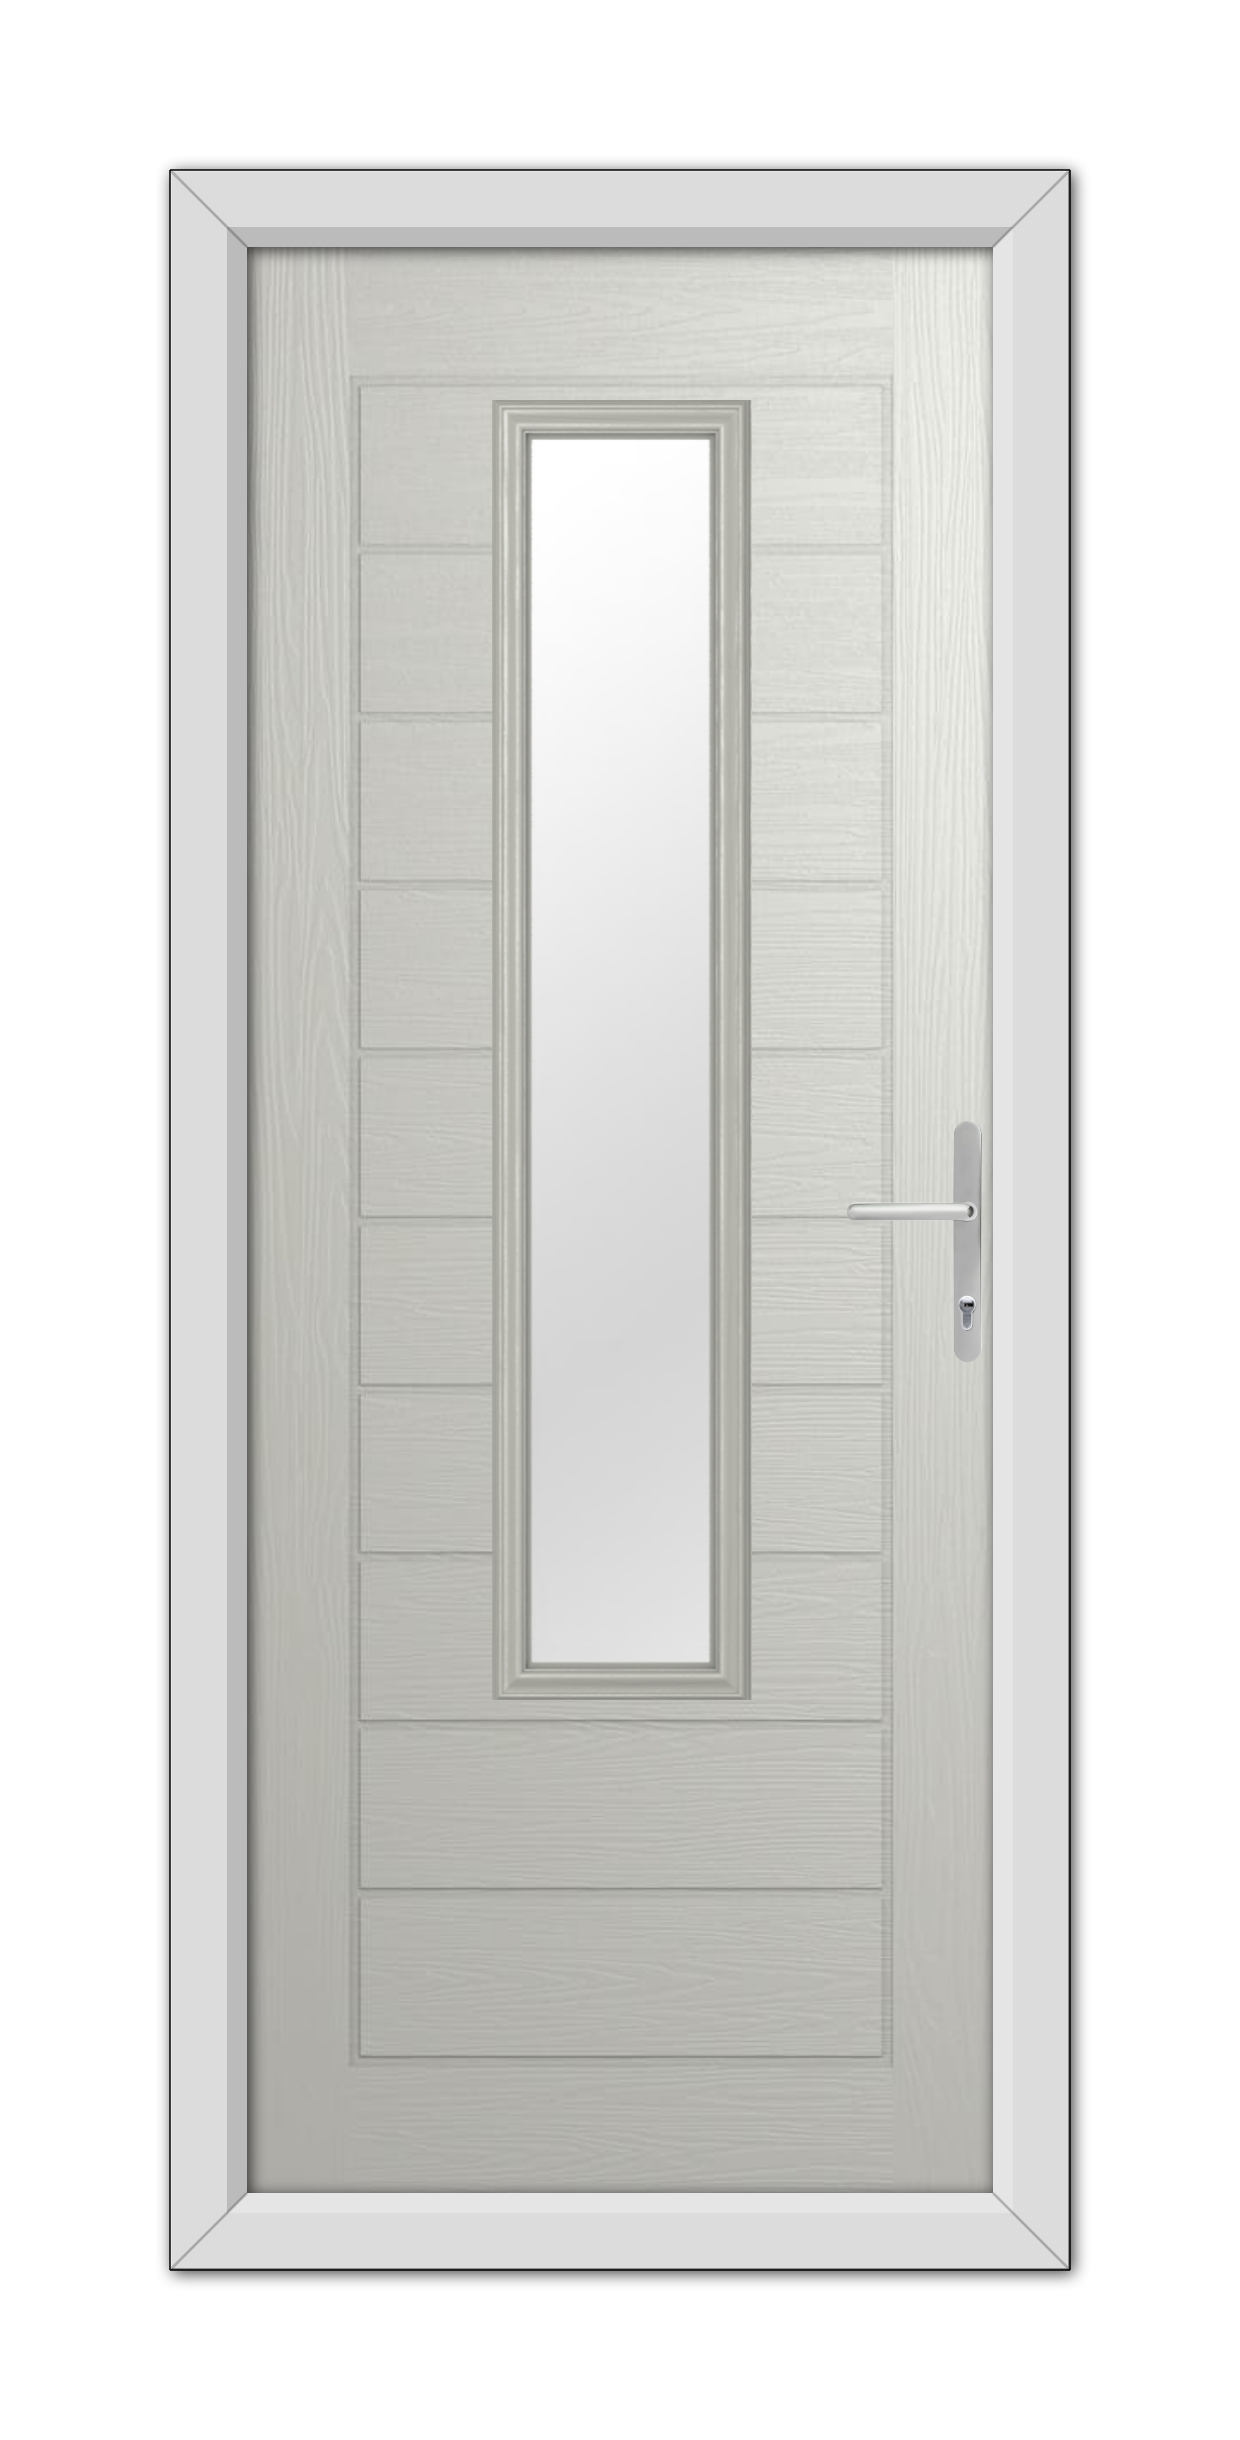 Agate Grey Bedford Composite Door 48mm Timber Core with a vertical, rectangular glass panel and a modern silver handle, set within a simple frame.